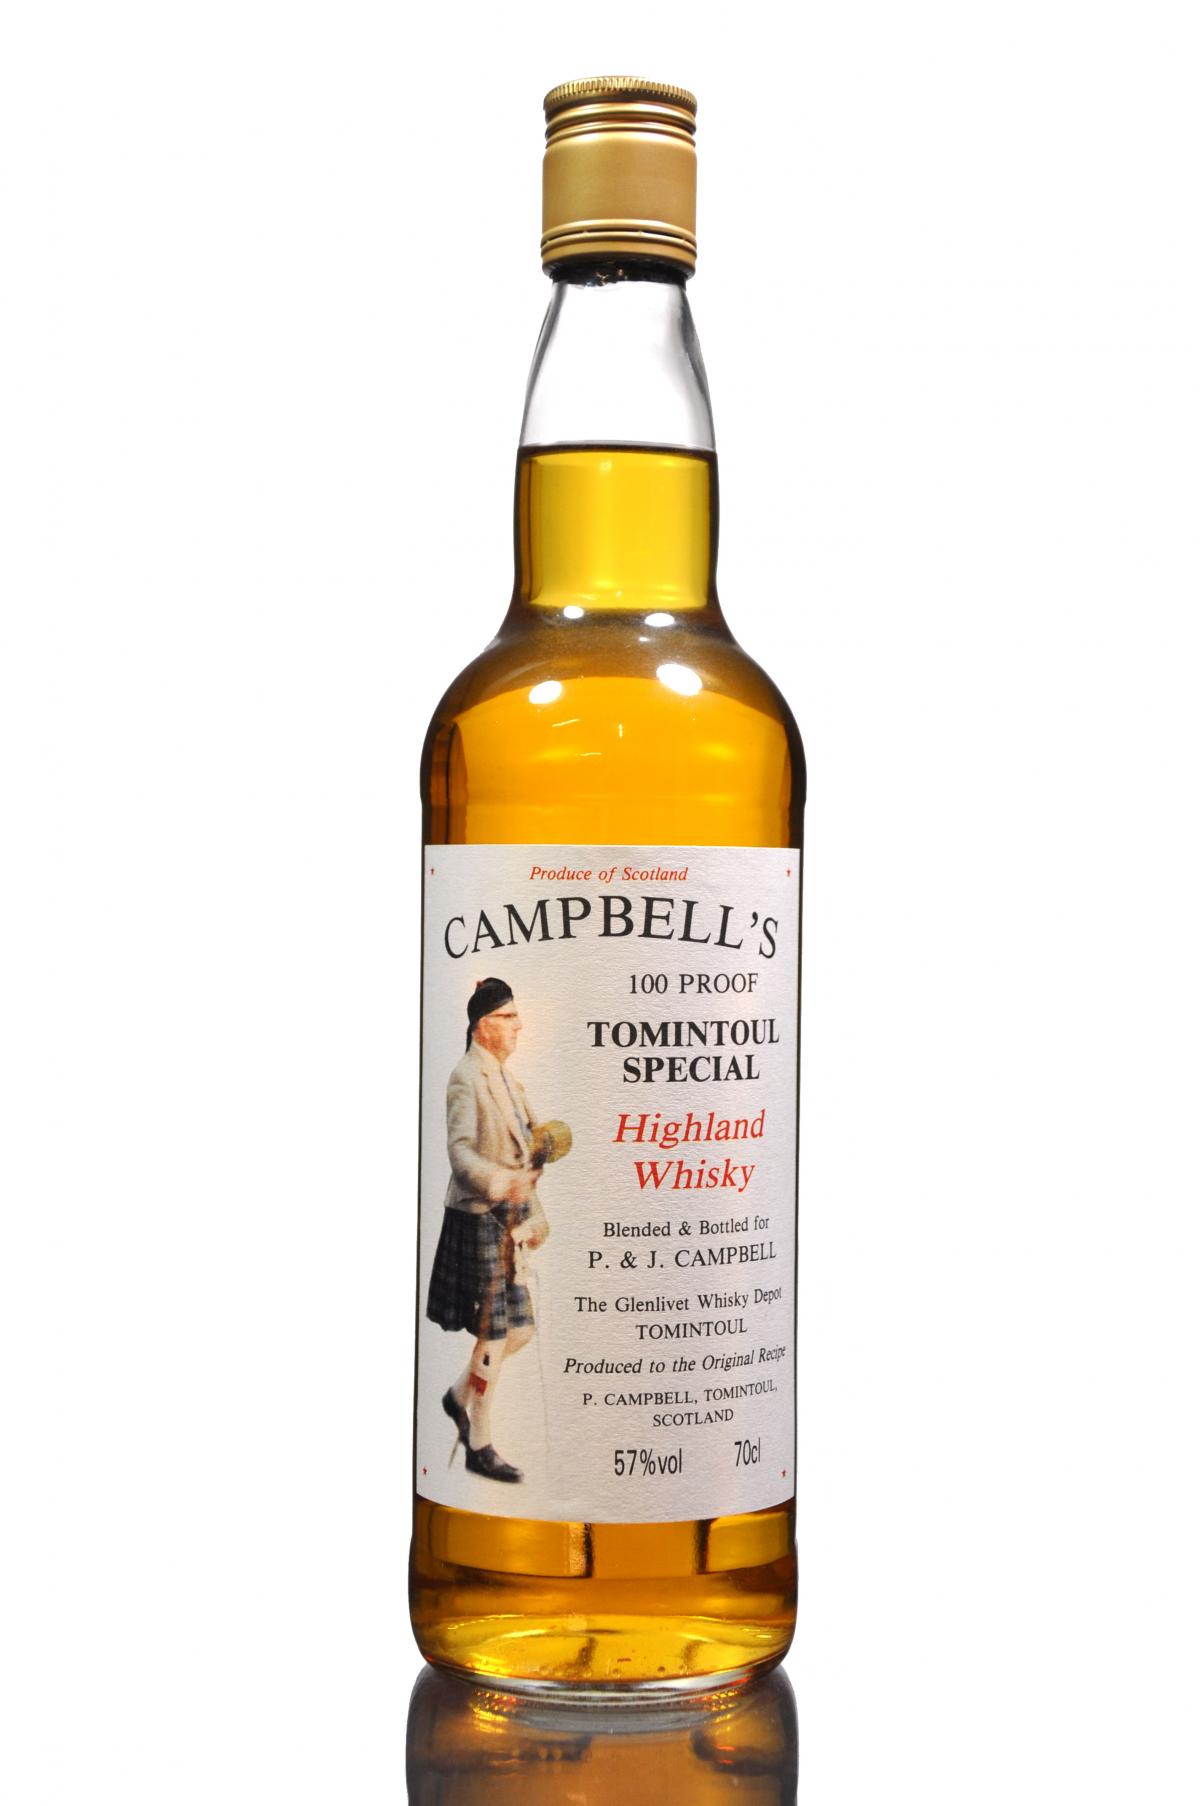 Campbells Tomintoul Special - 100 Proof